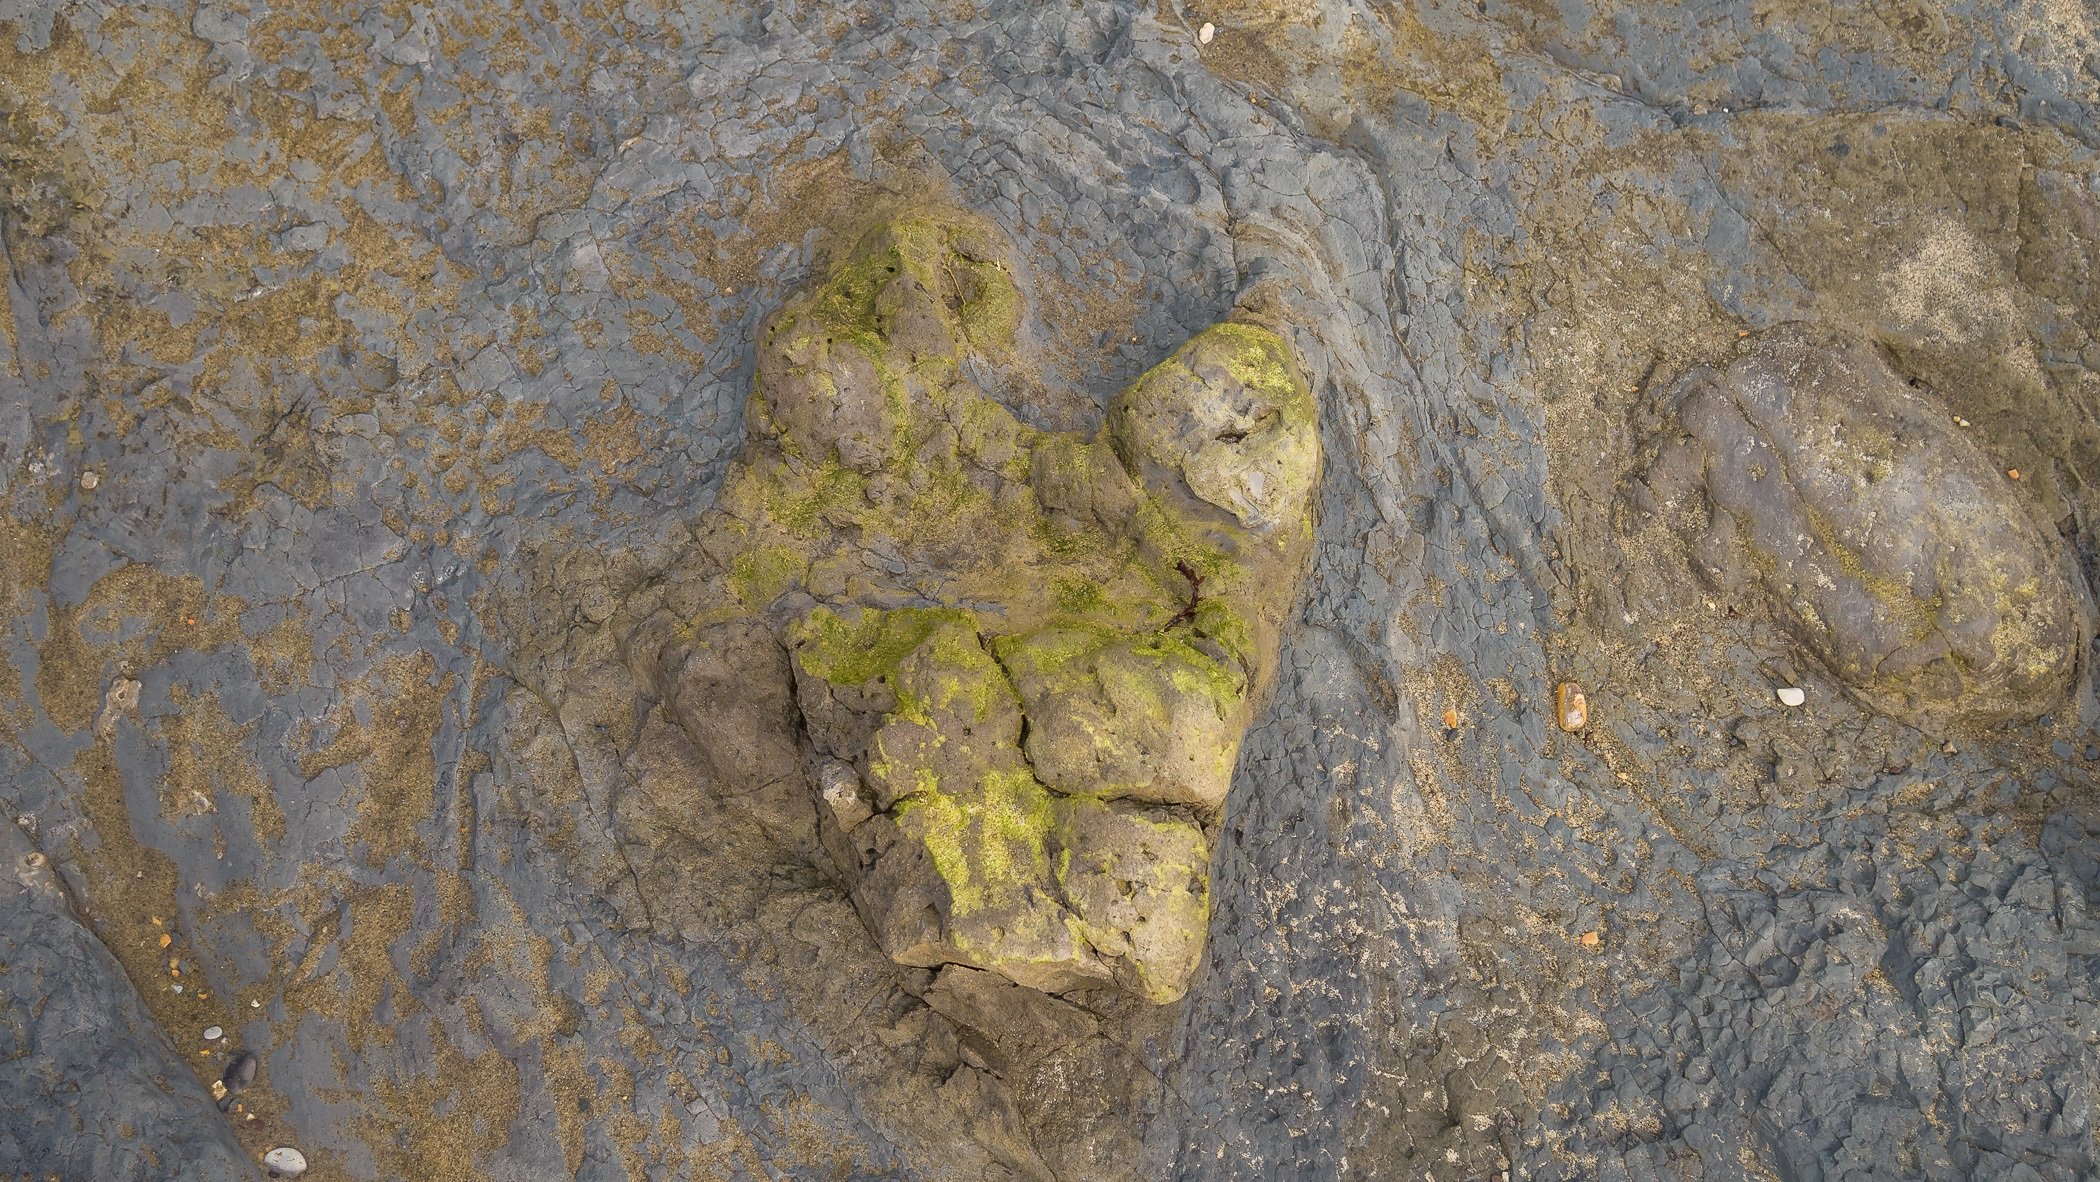 A dinosaur footprint we saw on the Isle of Wight